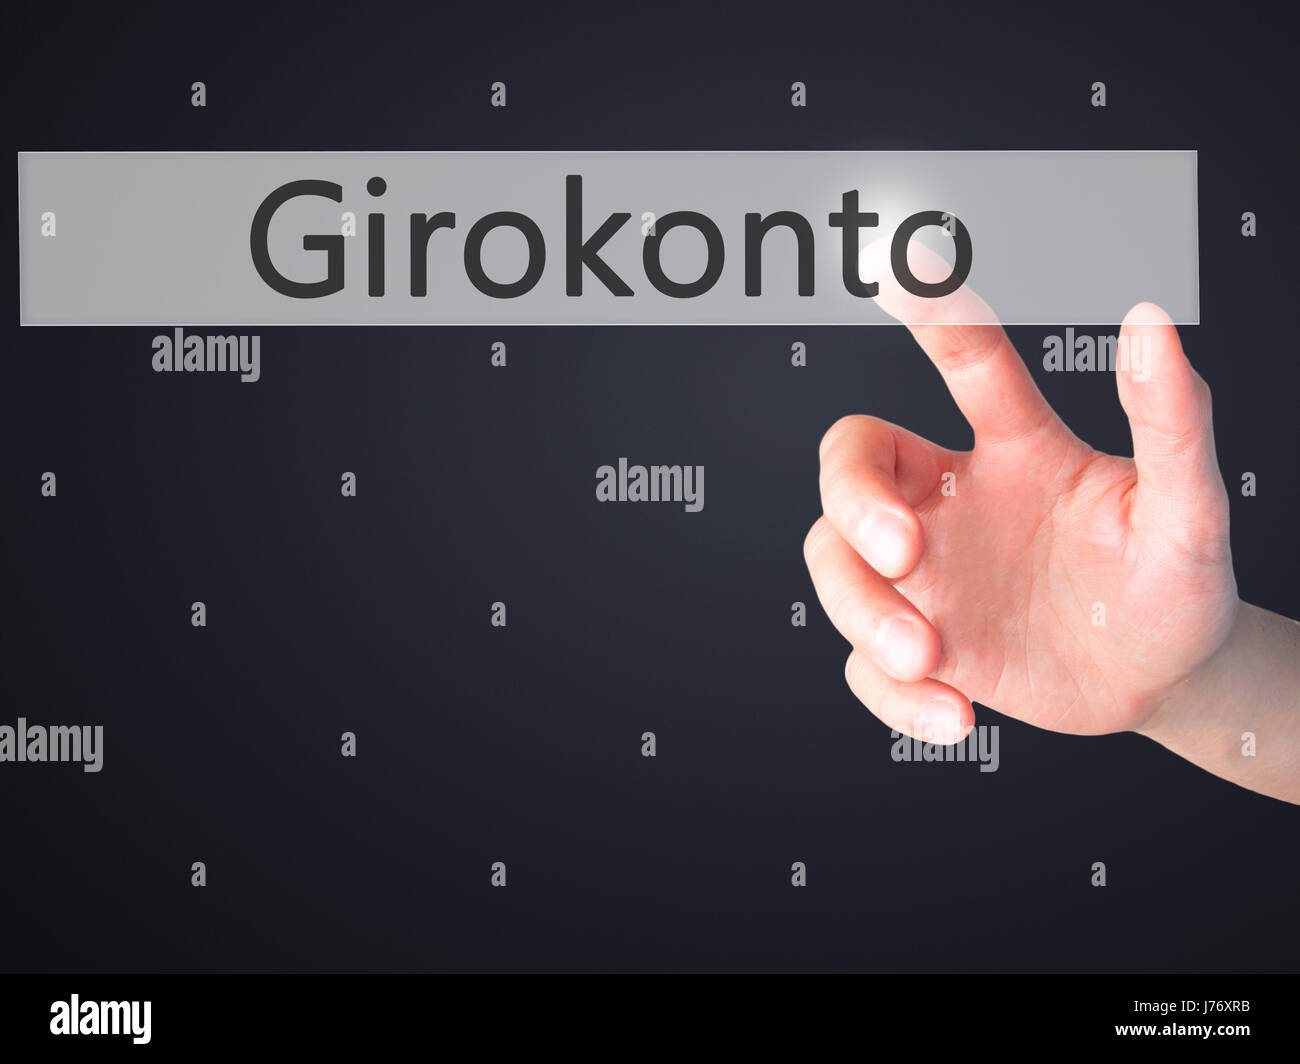 Girokonto (Checking Account)  - Hand pressing a button on blurred background concept . Business, technology, internet concept. Stock Photo Stock Photo